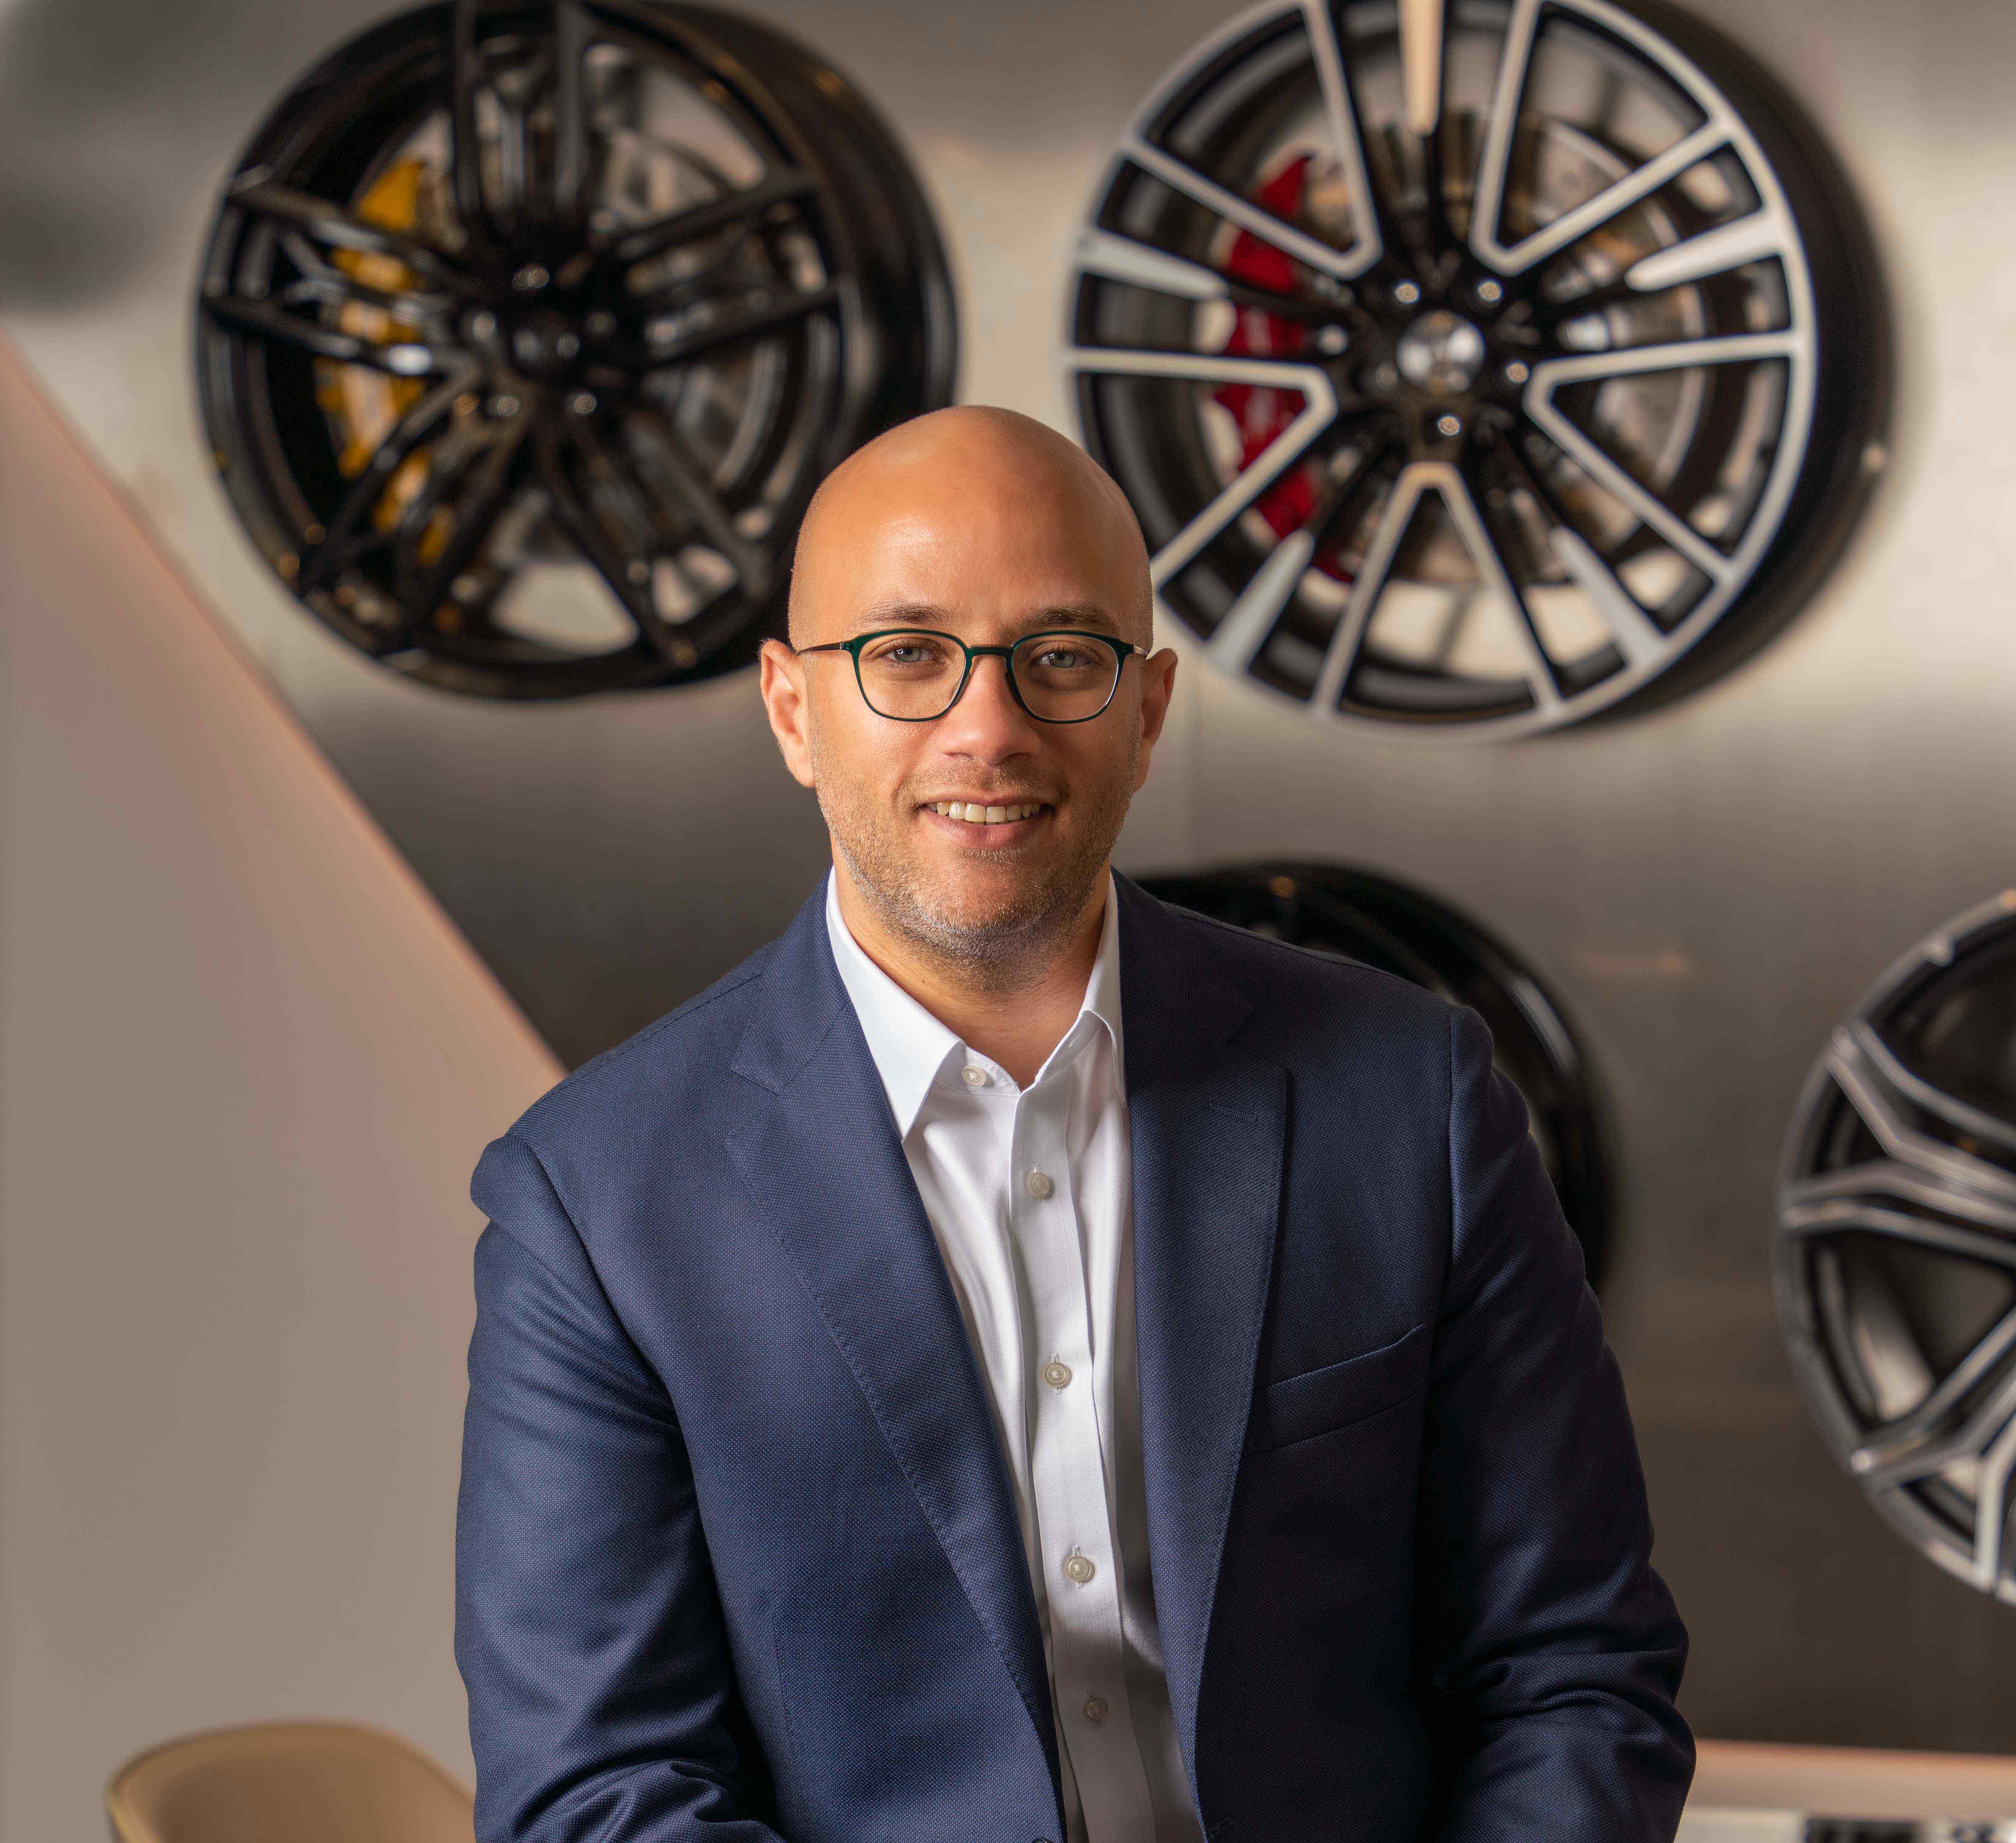 Hamdy Elshantoury appointed New Maserati General Manager for Middle East and Africa region